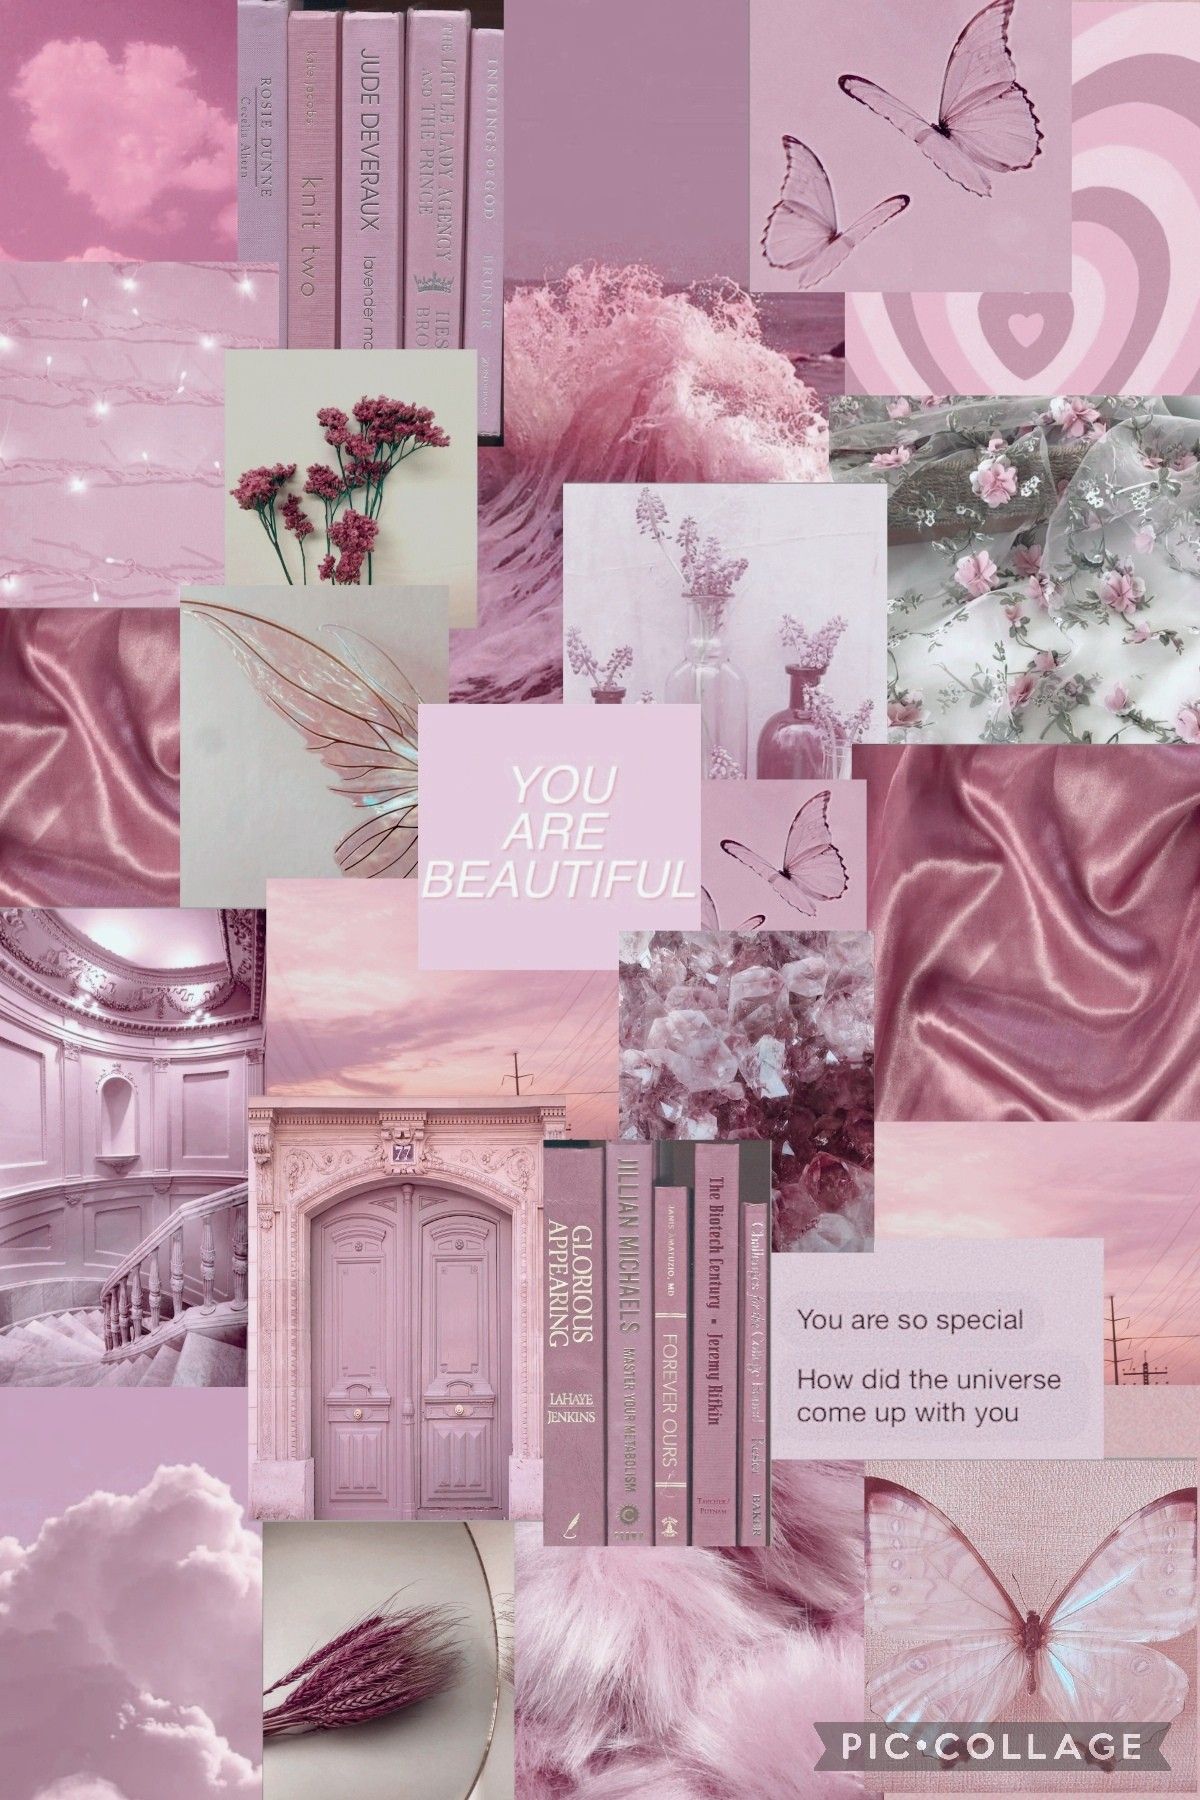 Aesthetic pink collage, pink aesthetic, pink wallpaper, pink aesthetic wallpaper, pink aesthetic background, pink aesthetic pictures, pink aesthetic photos, pink aesthetic phone wallpaper, pink aesthetic desktop wallpaper, pink aesthetic phone background - Light pink